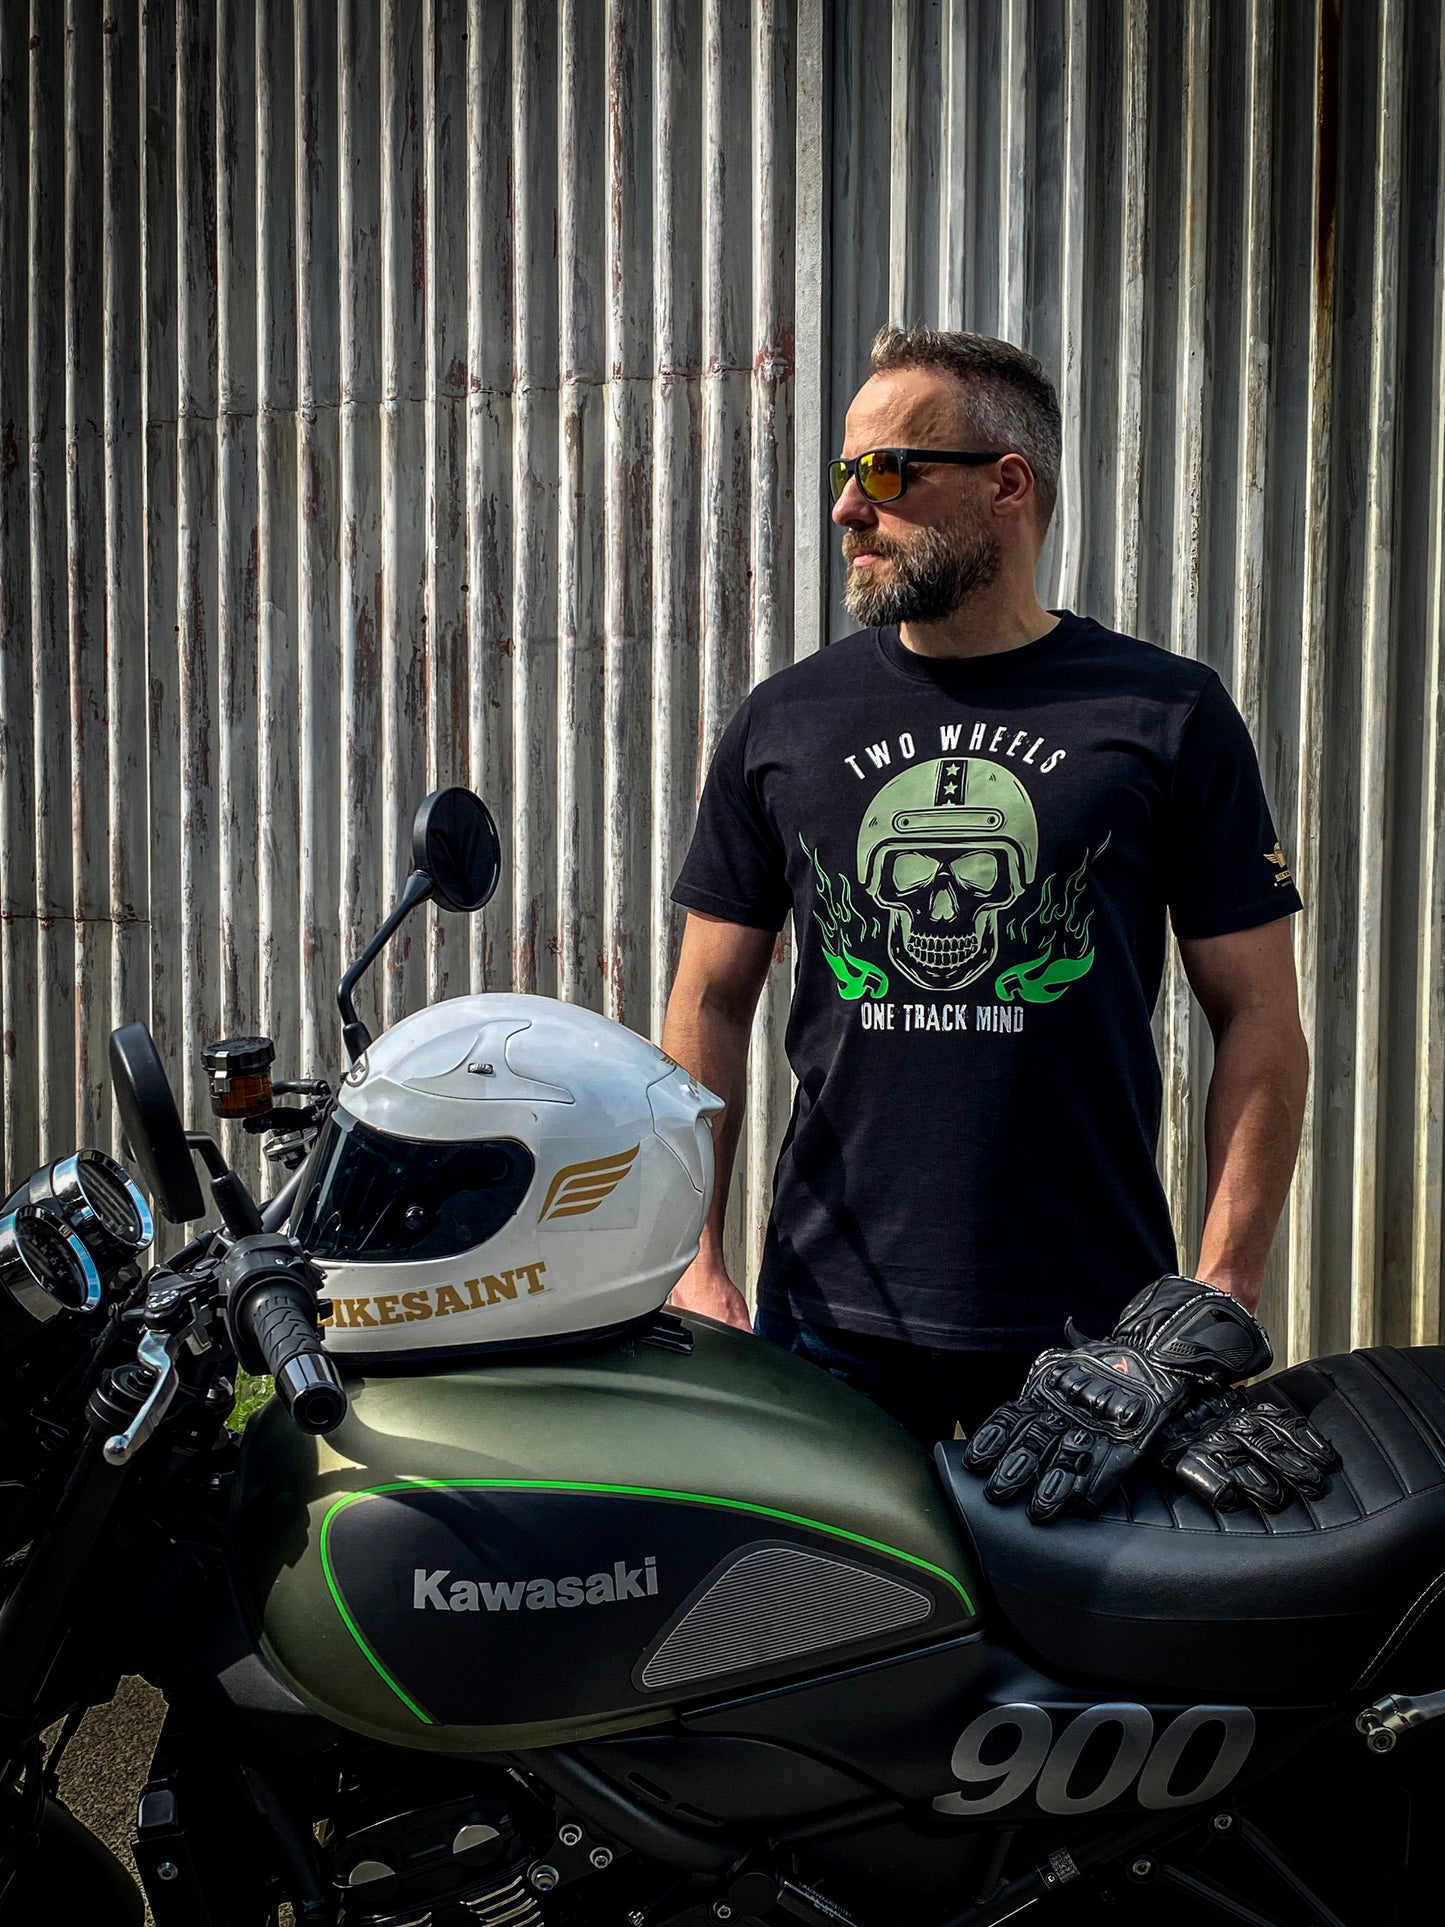 motorcycle t-shirt two wheels one track mind